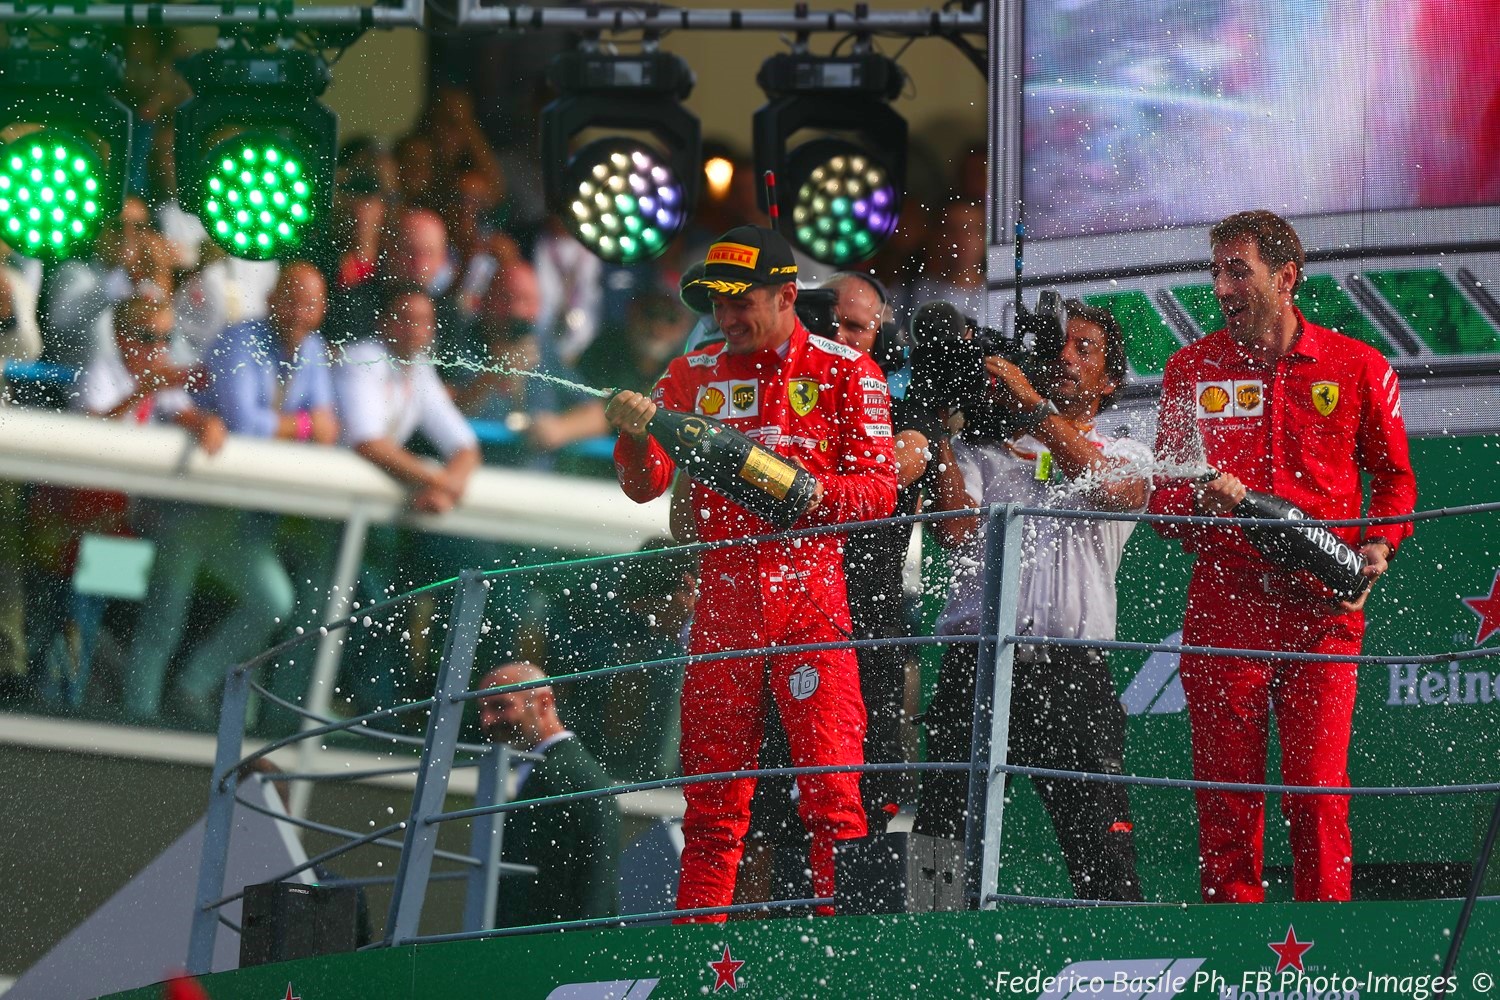 Ferrari had their moment in Monza, now it's back to reality